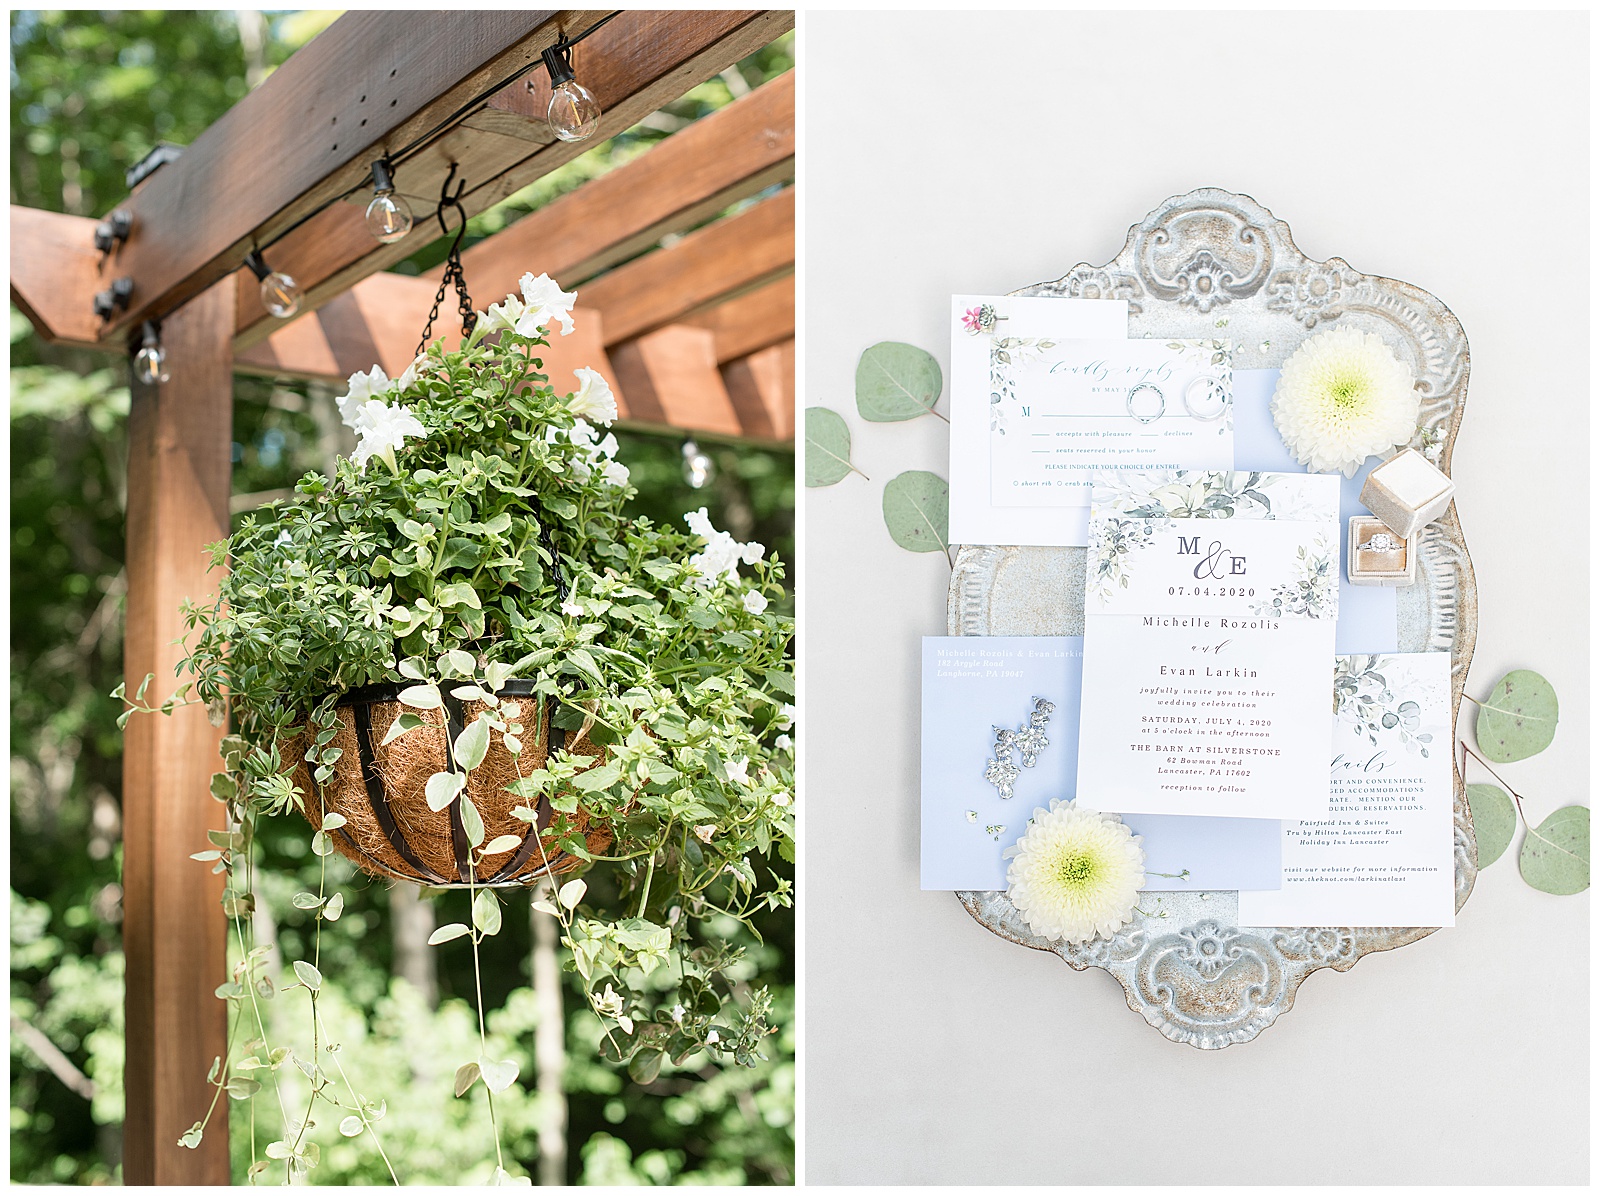 wedding details on metal tray and basket of white florals